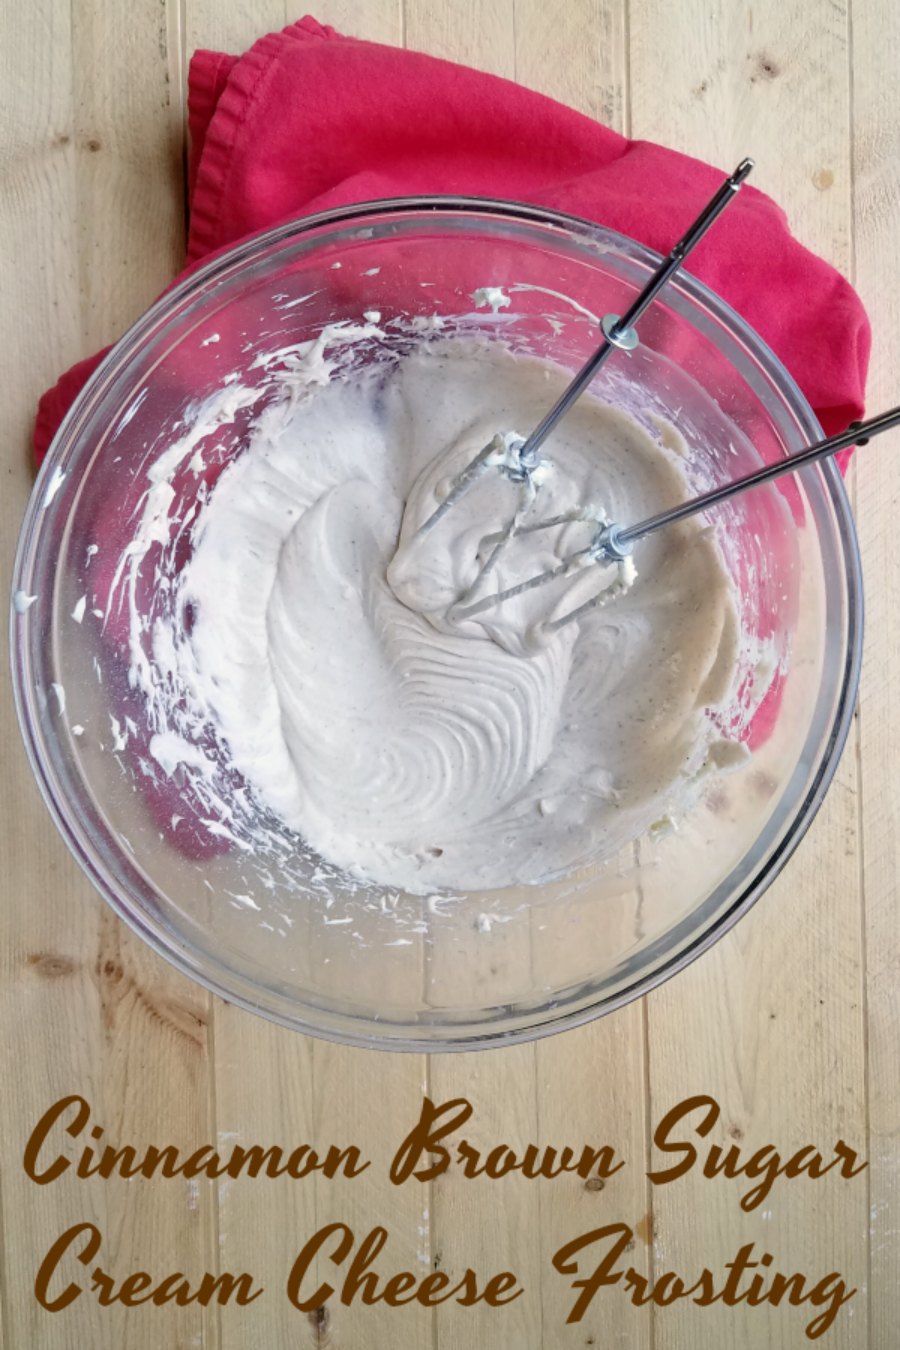 Cream cheese frosting is always a hit in my book, but spike it with brown sugar and cinnamon and it really is a taste of heaven.